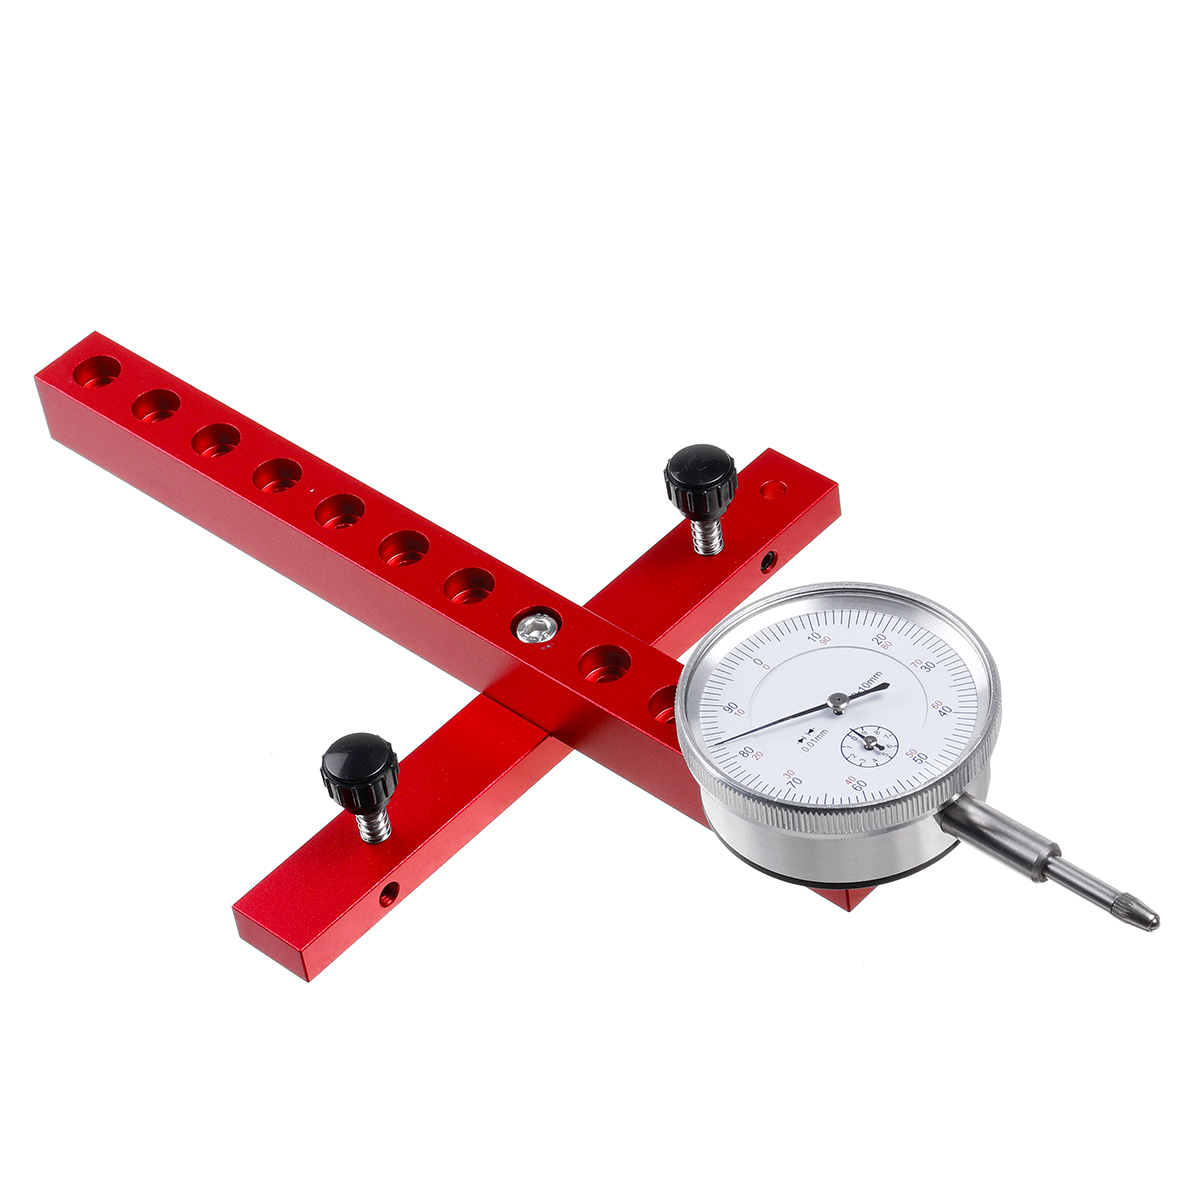 Aluminum-Alloy-Dial-indicator-Gauge-Table-Saws-Metric-or-Imperial-For-Aligning-and-Calibrating-Machi-1914181-6